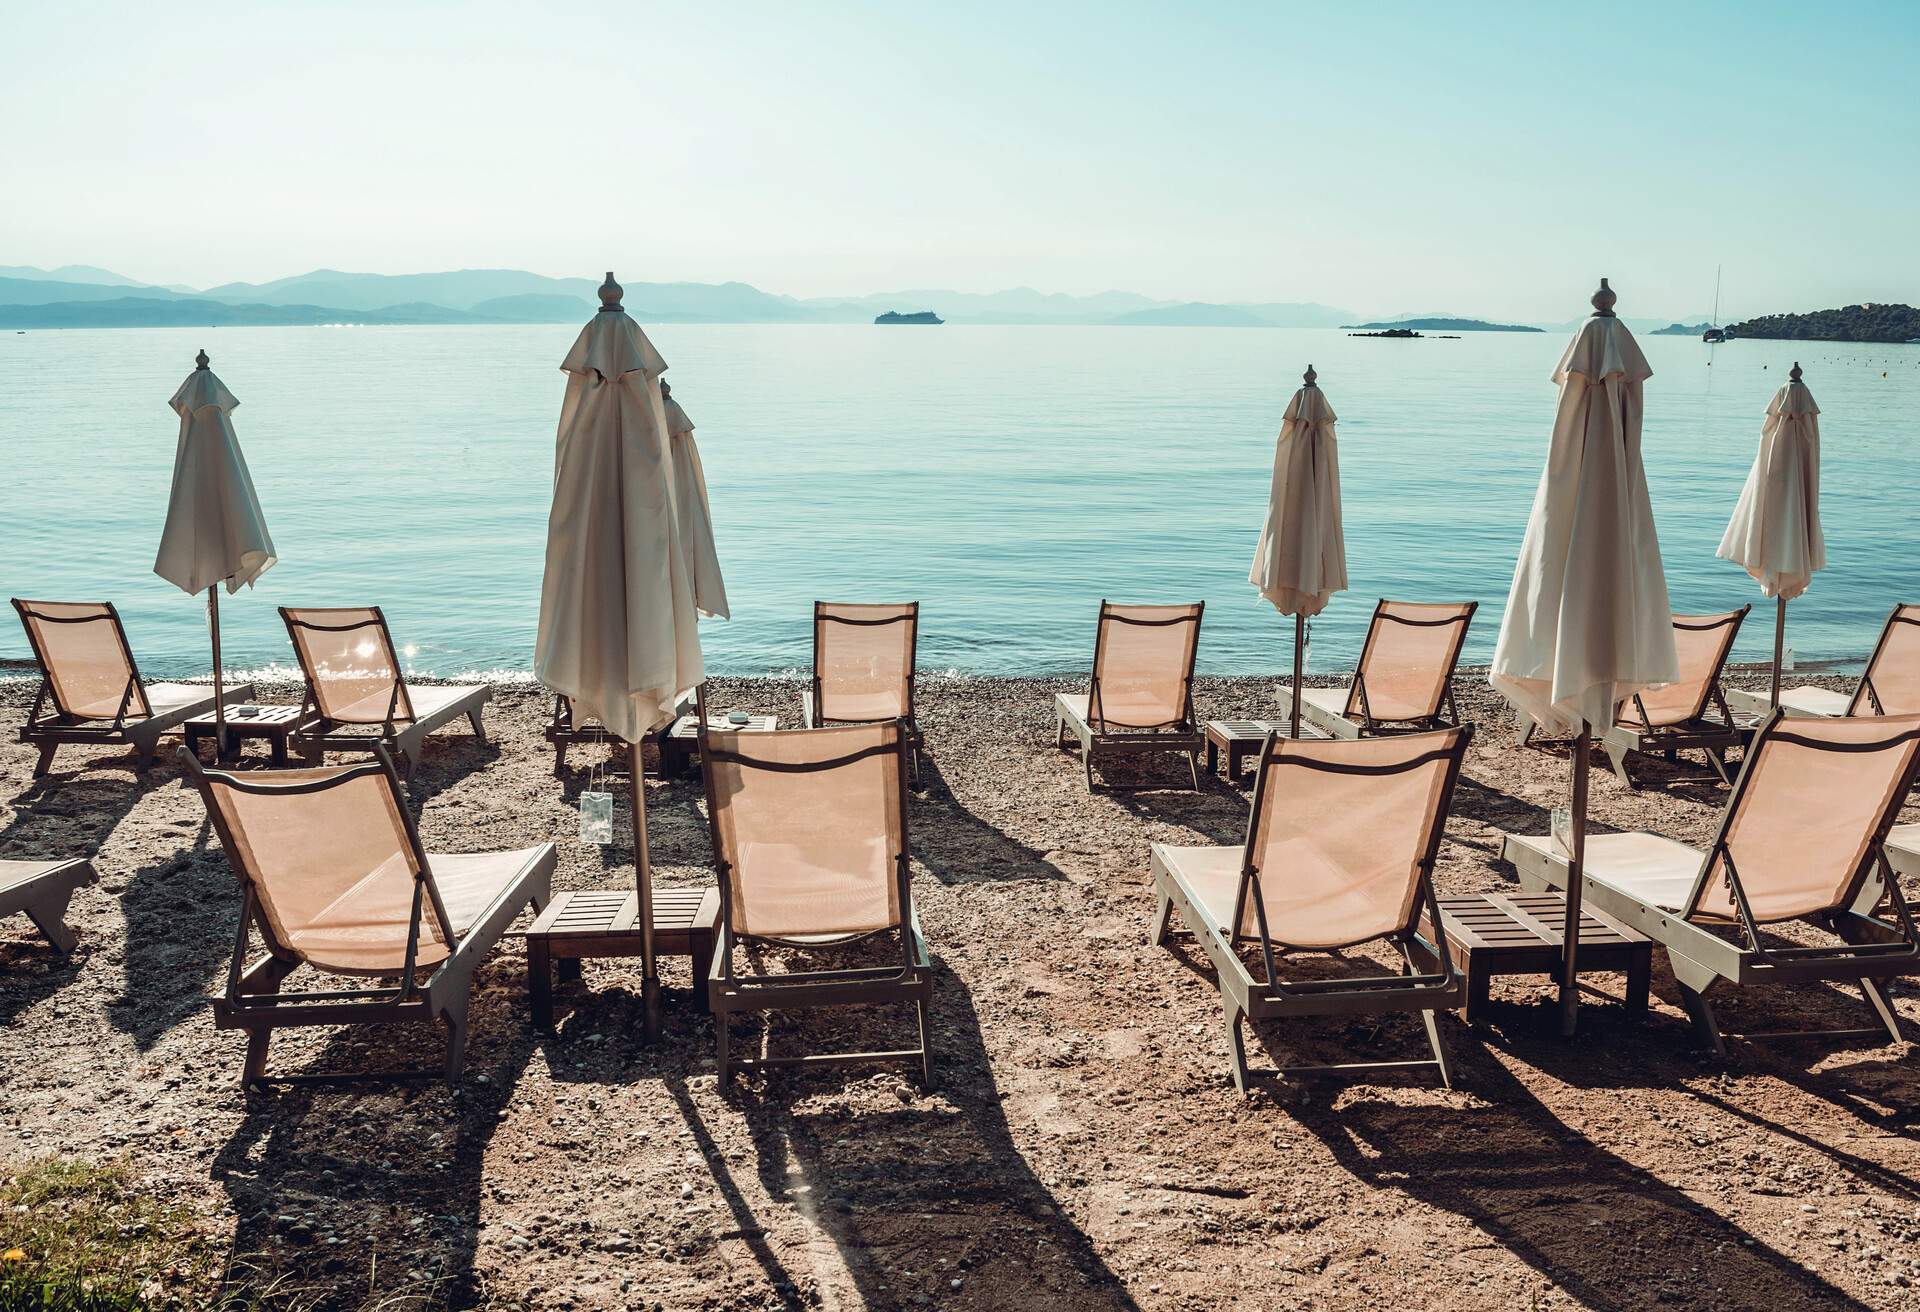 Dassia resort on Corfu, Greece – beach with golden sand, umbrellas and chairs. Summer landscape with parasols, sunbeds, palm trees and blue sky and sea on the horizon.